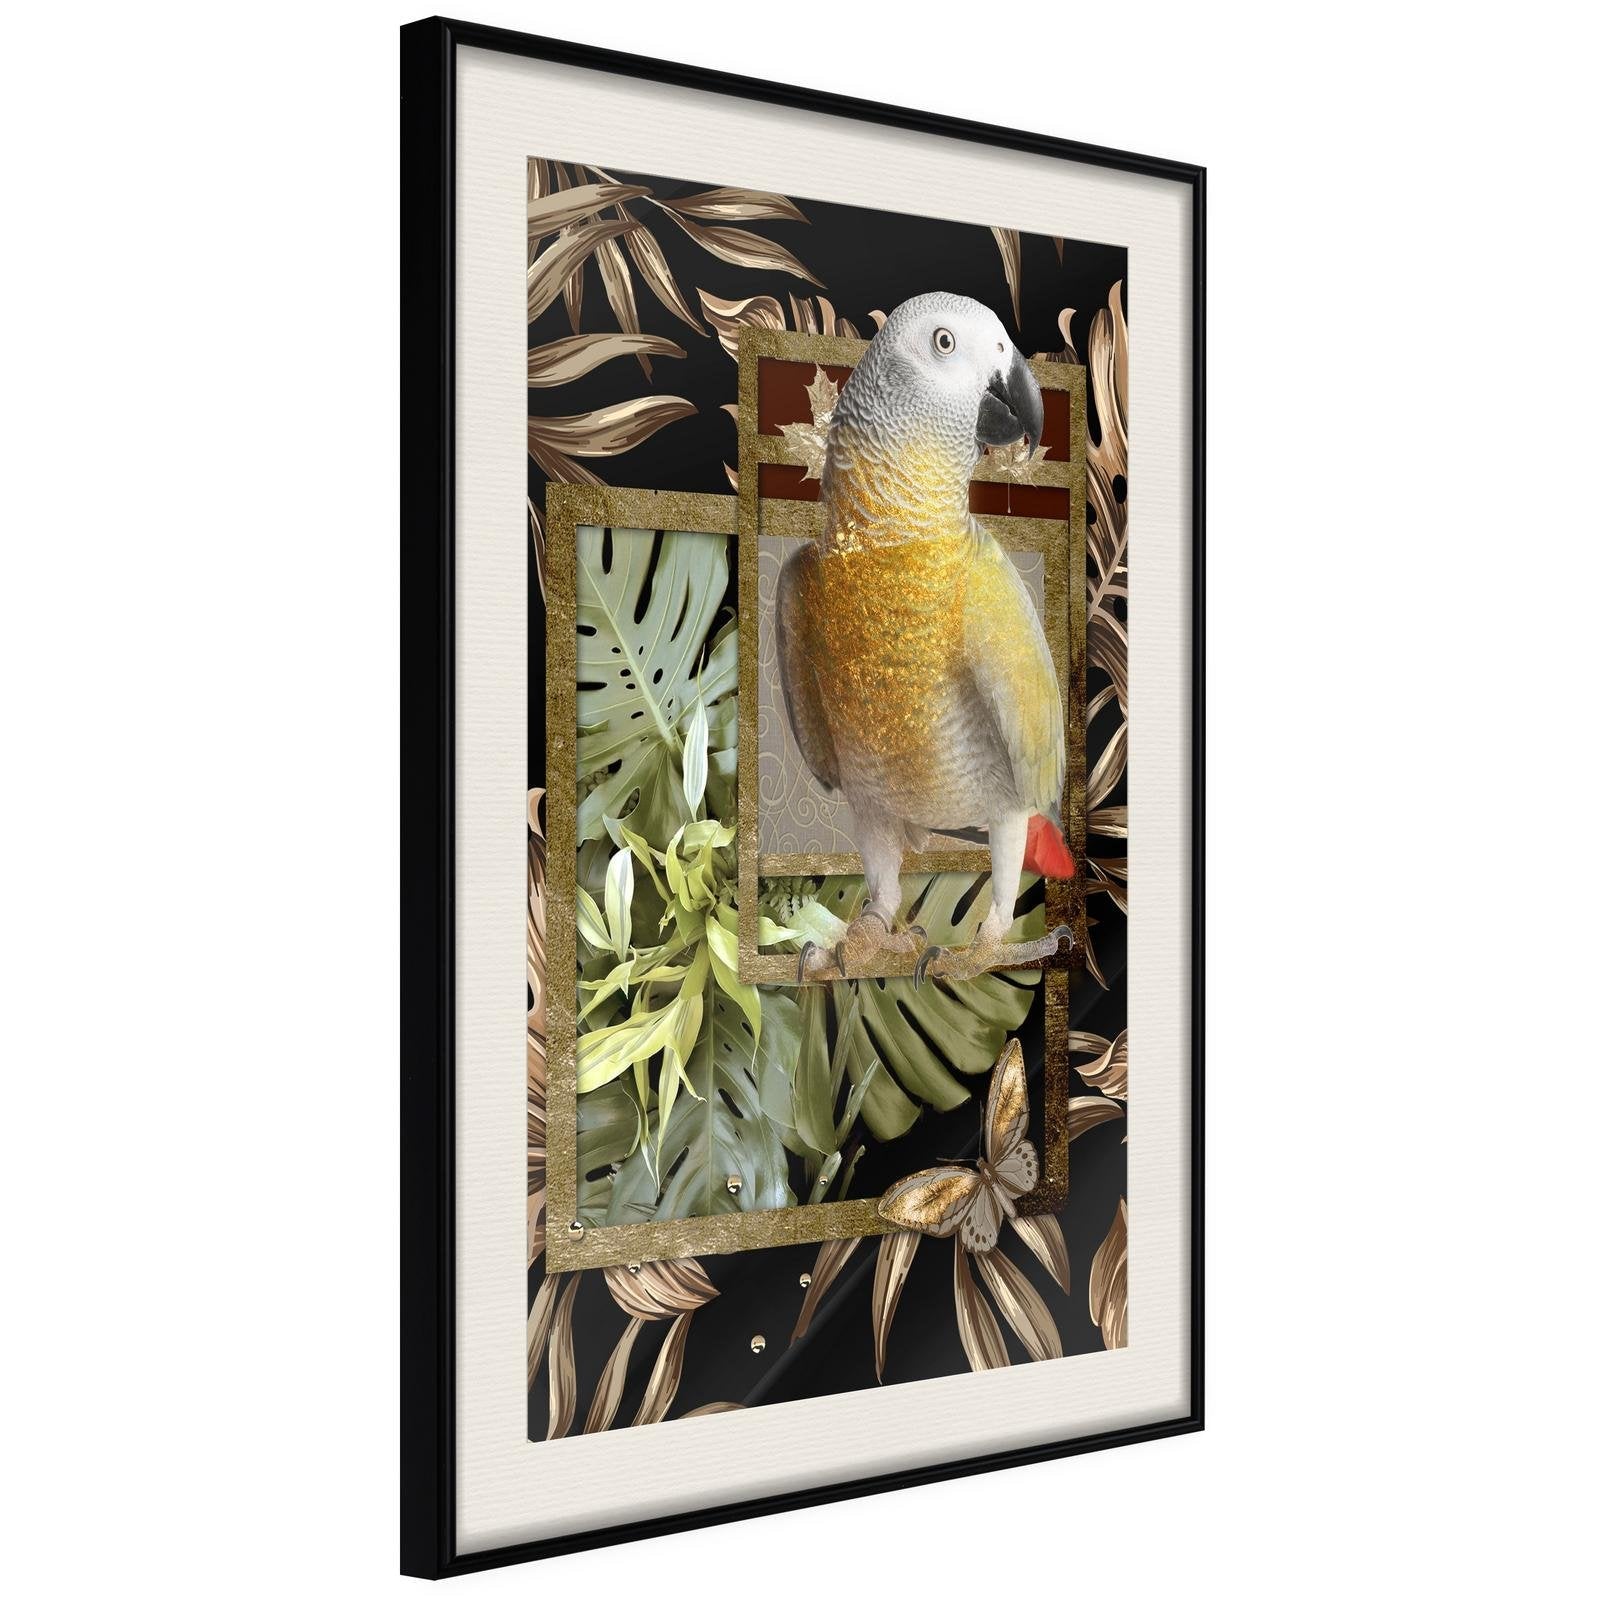 Inramad Poster / Tavla - Composition with Gold Parrot - 30x45 Svart ram med passepartout